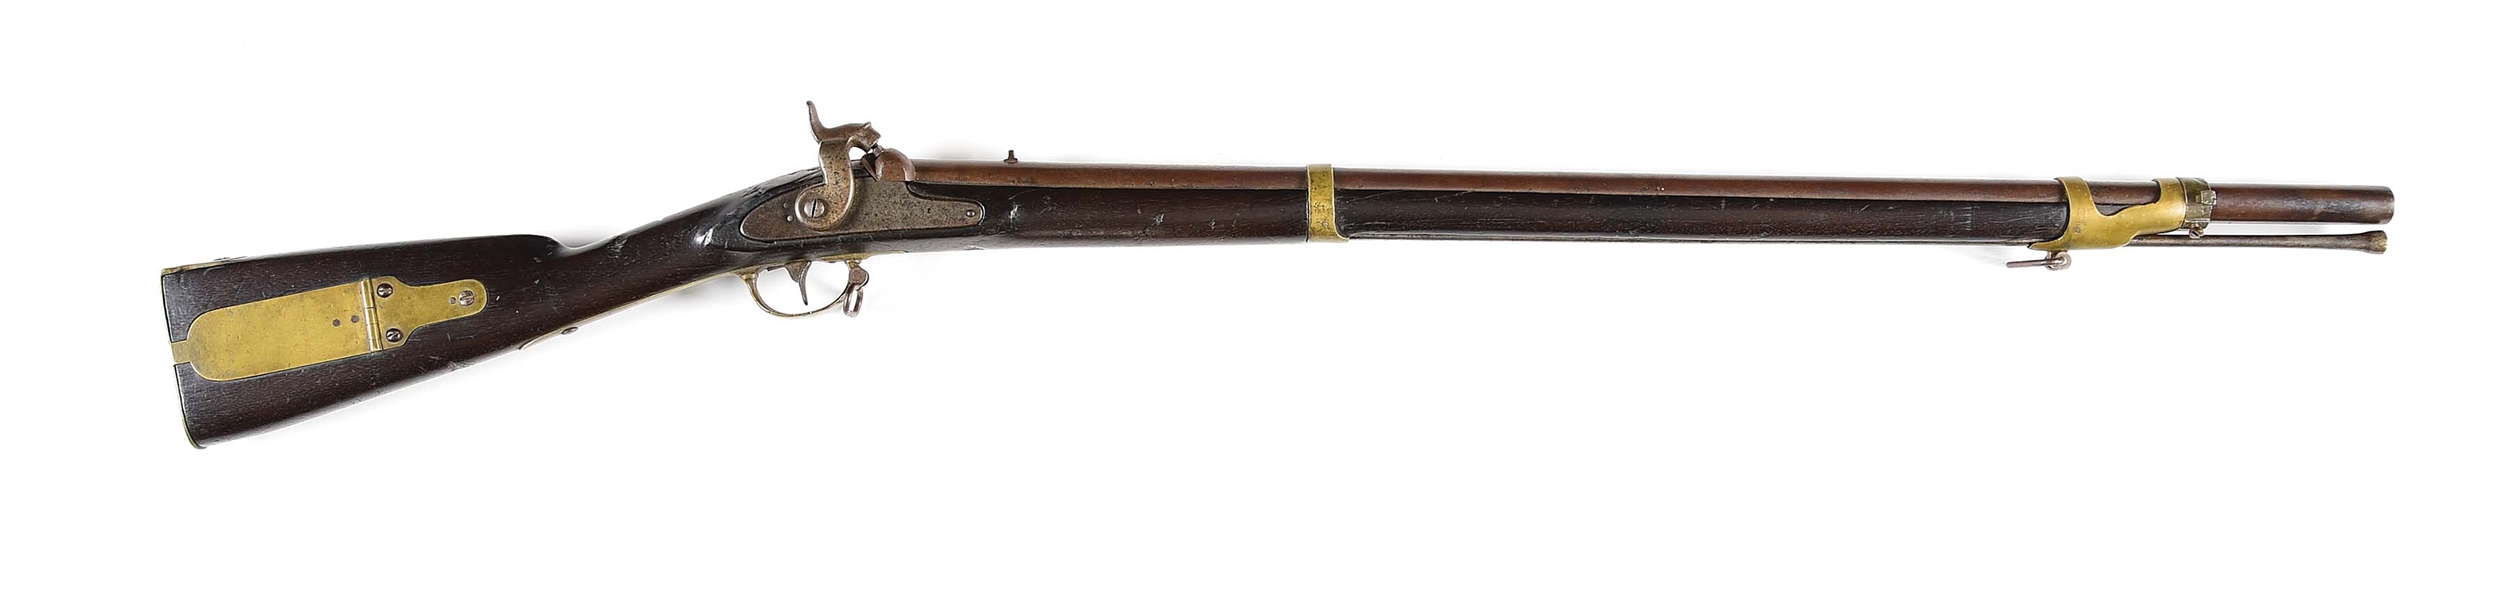 (A) CONFEDERATE MADE COPY OF 1841 MISSISSIPPI RIFLE MARKED MANTON, FORMER BEN MICHEL COLLECTION.